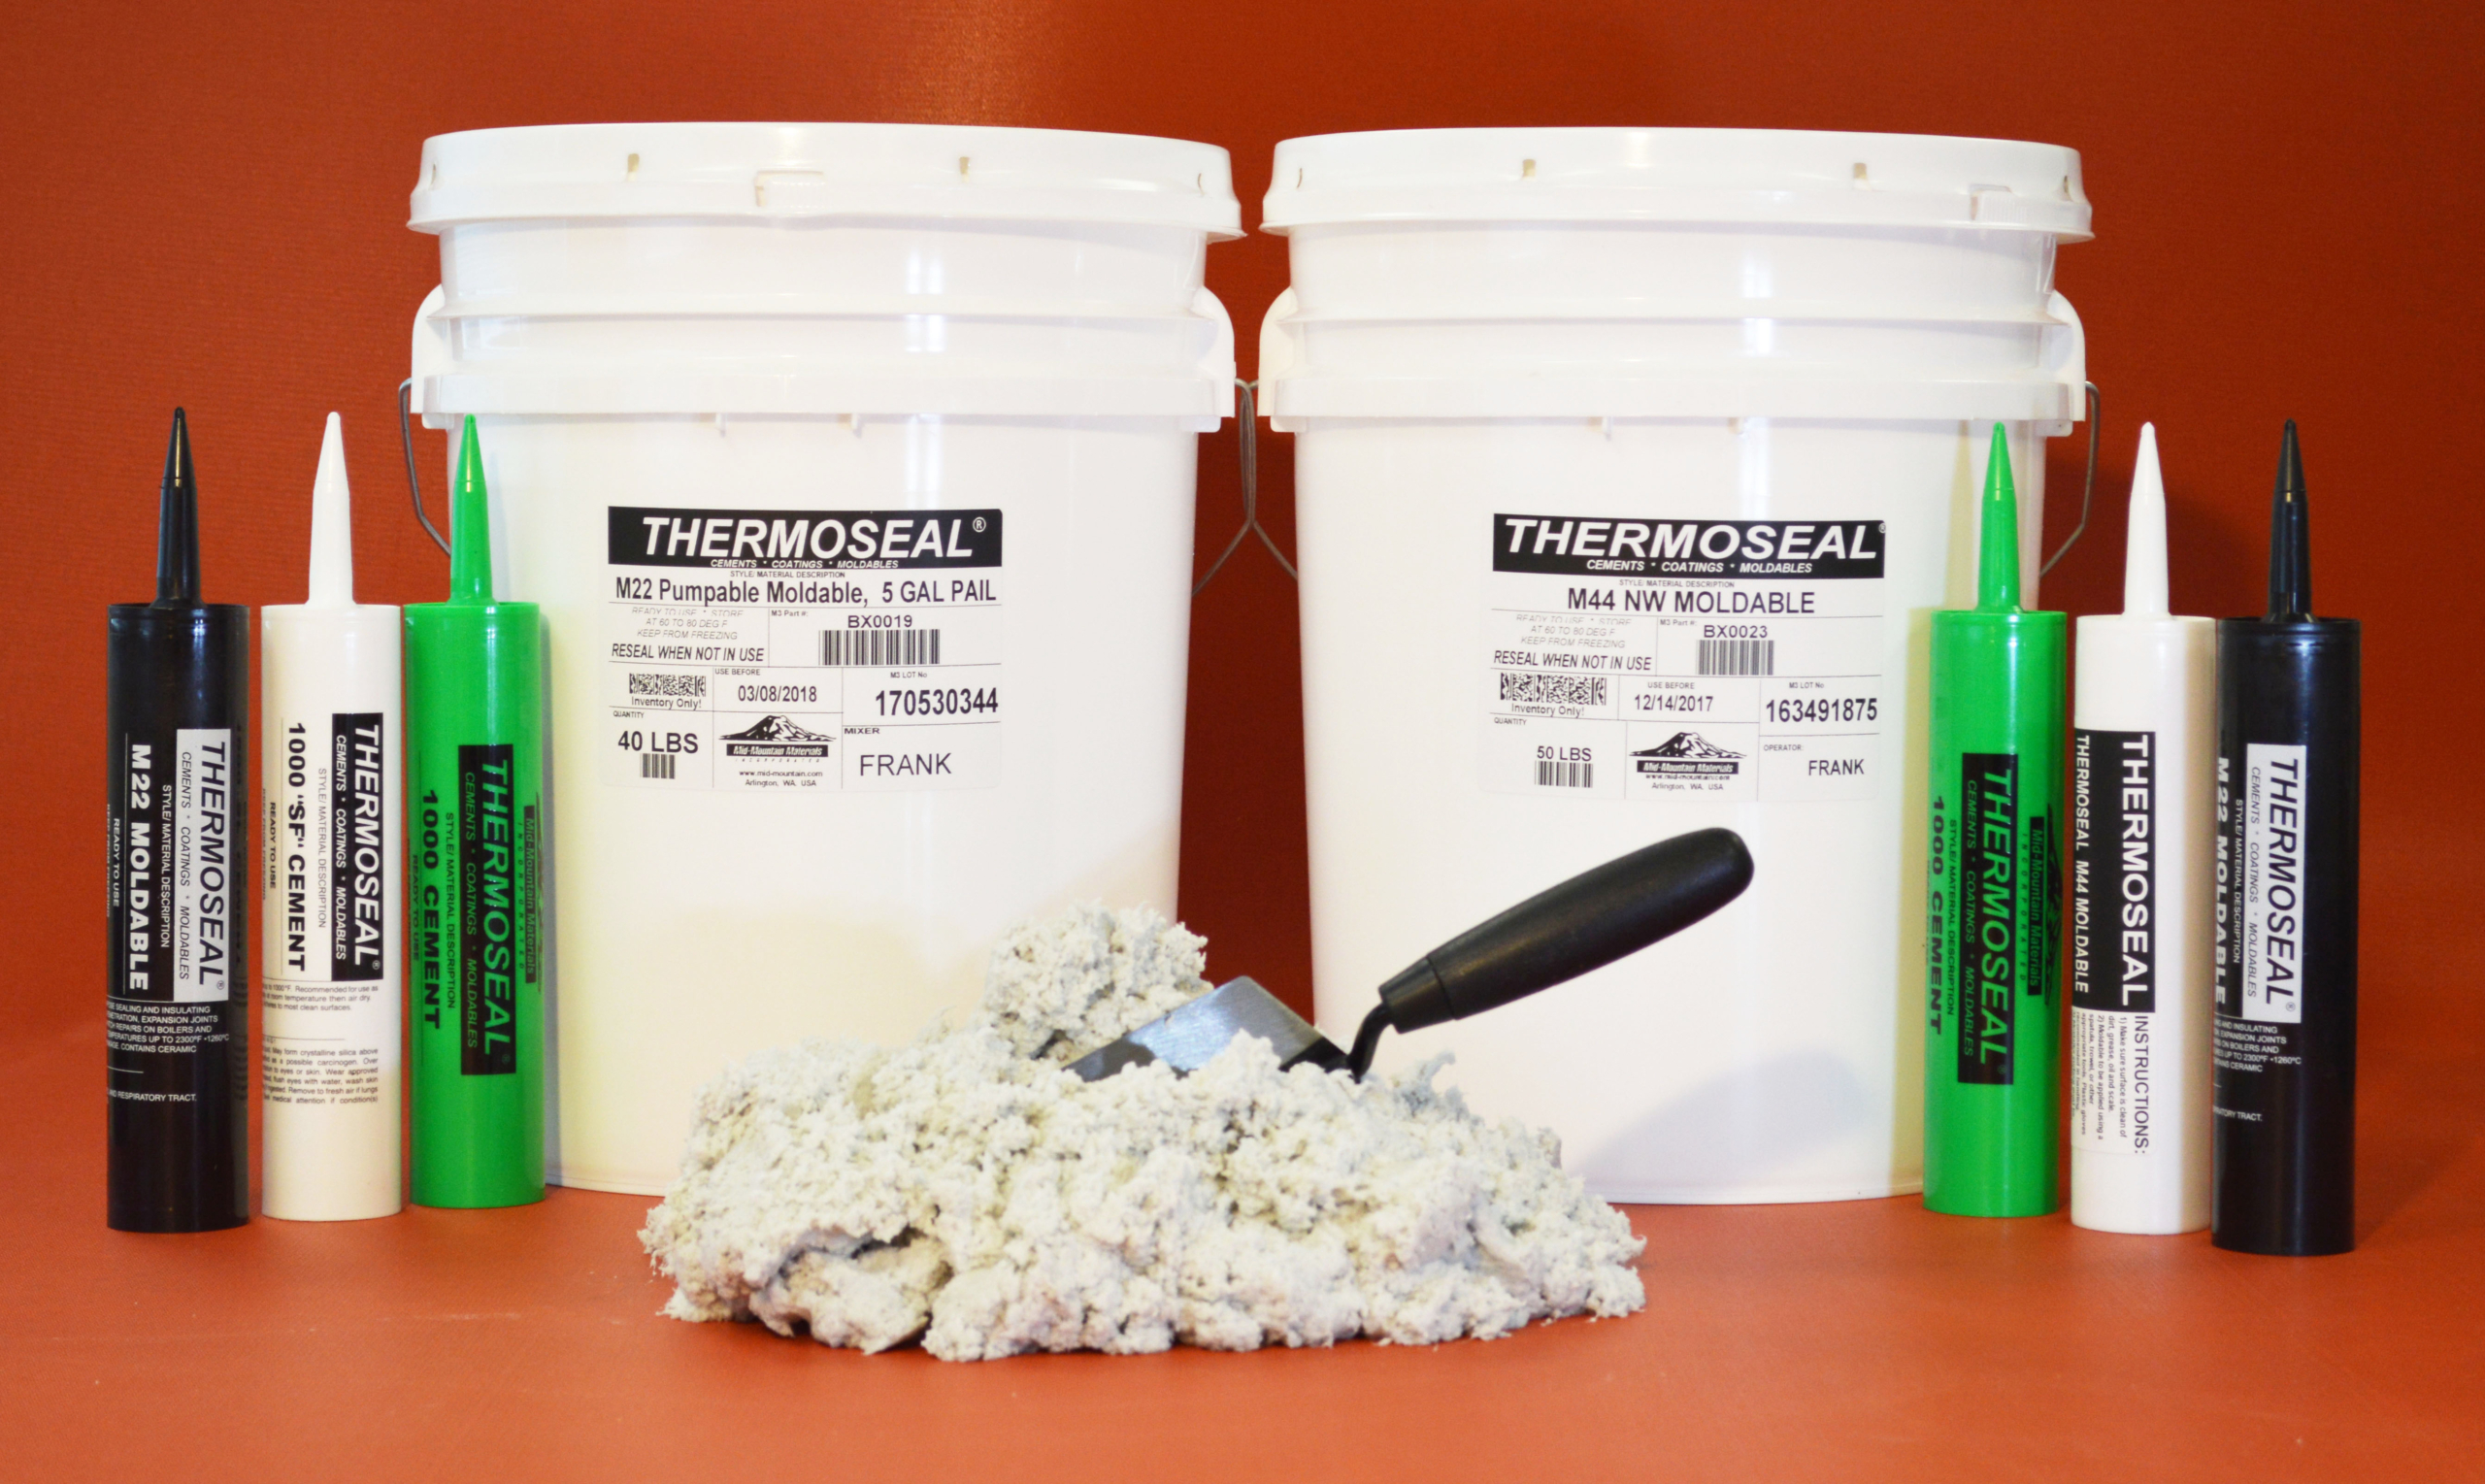 What is Refractory Cement? - Mid-Mountain Materials